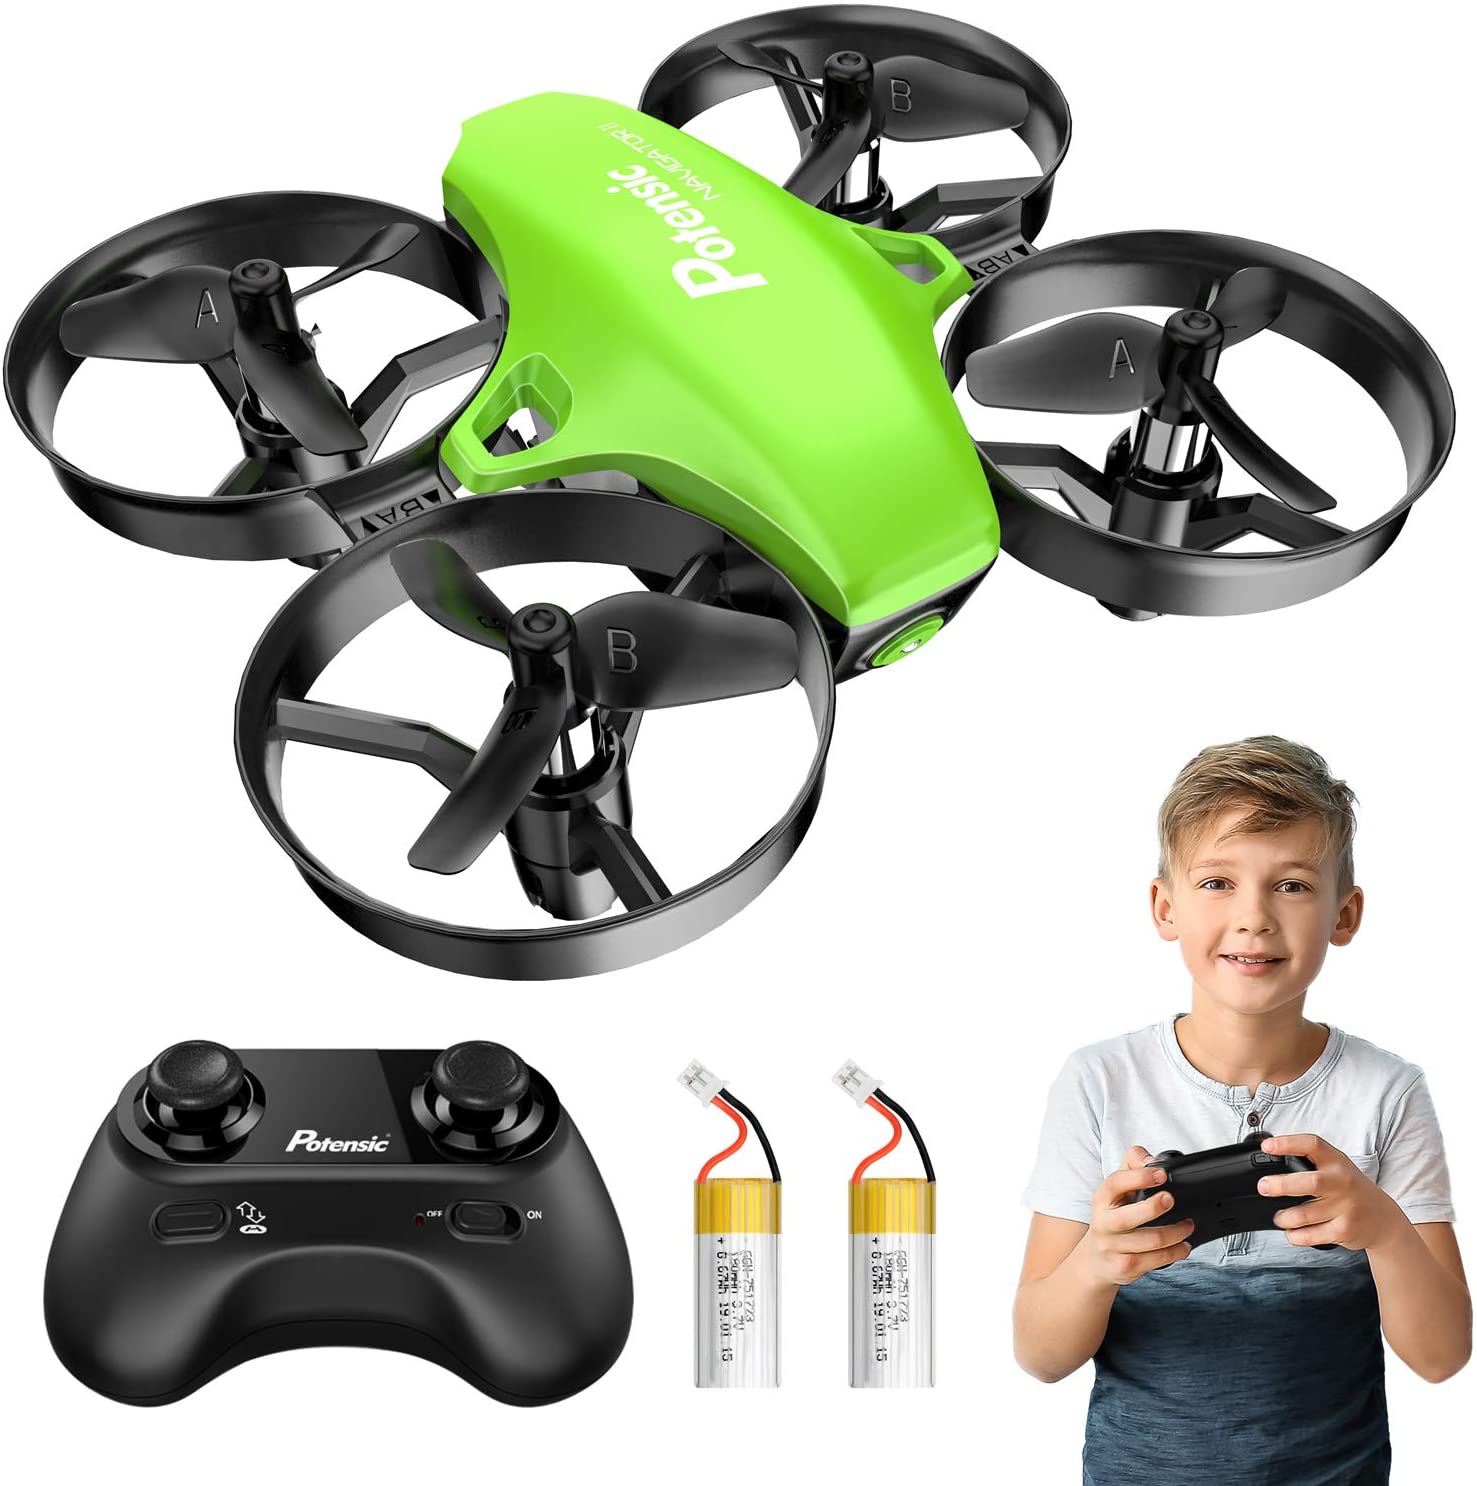 Potensic A20 Auto Hovering Mini RC Drone For Kids